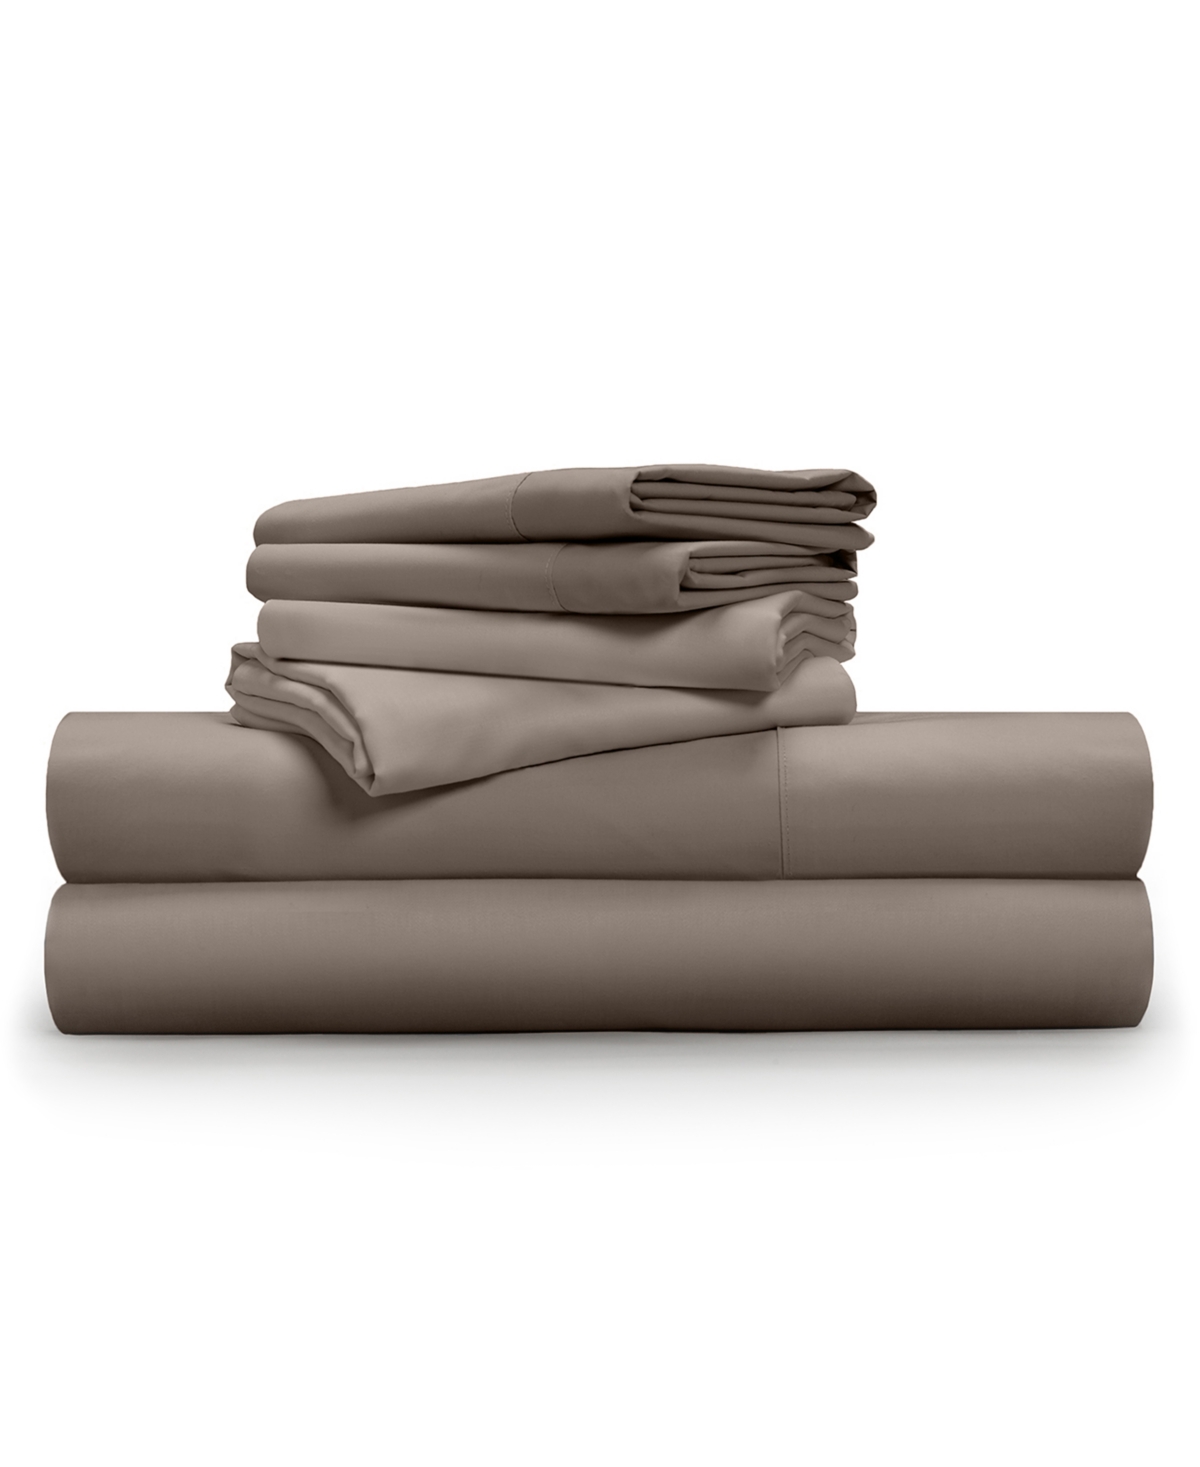 Pillow Guy 600 Thread Count Luxe Soft & Smooth 6 Piece Sheet Set, King In Sandy Taupe